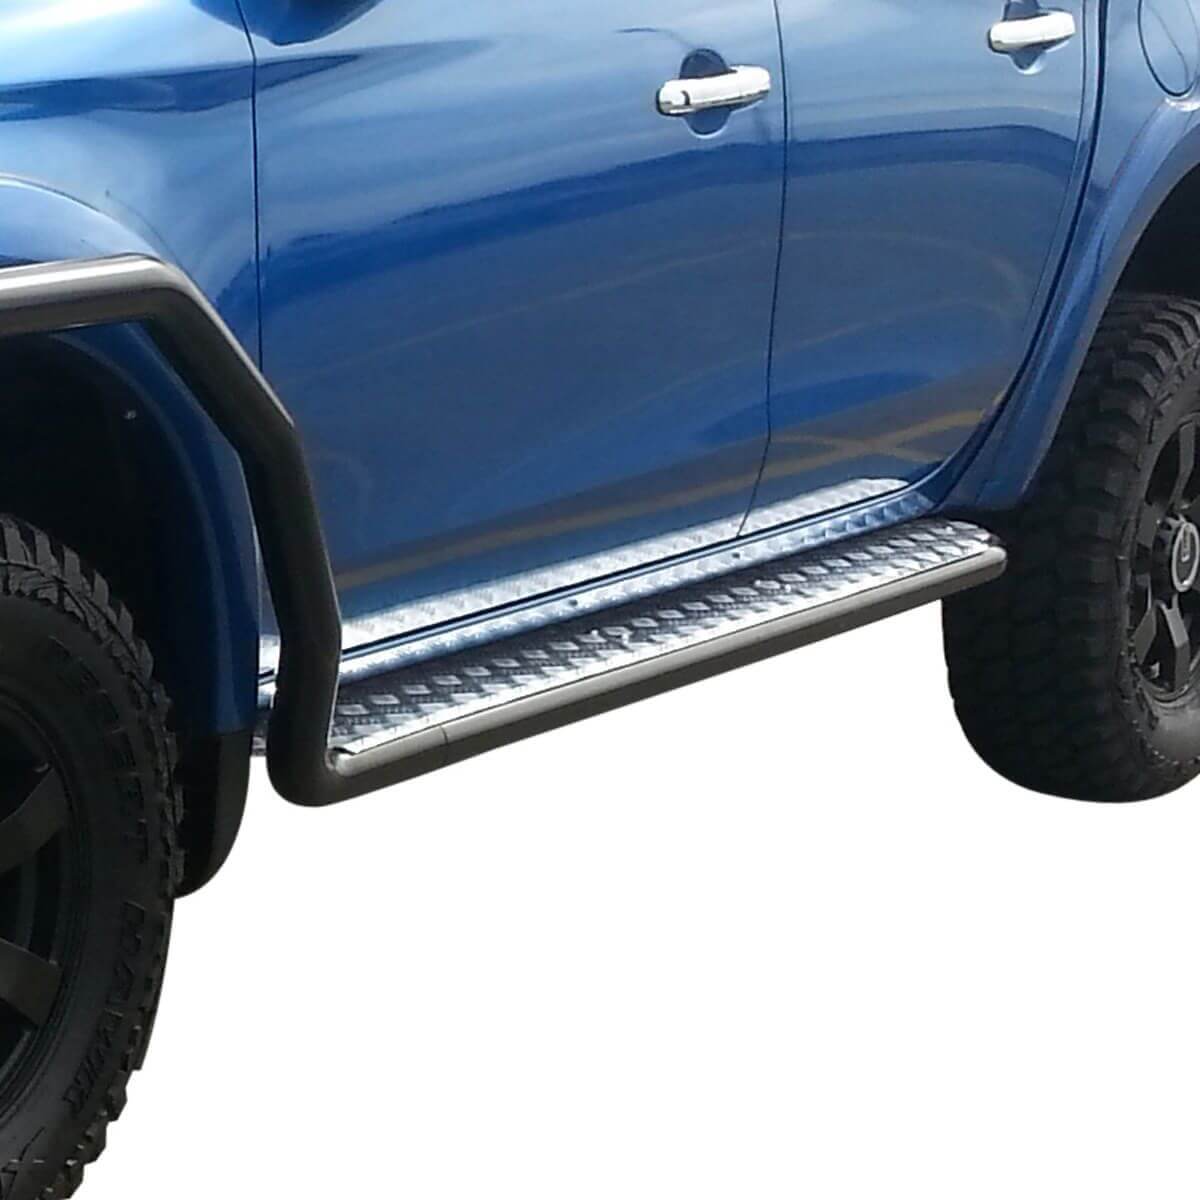 Triton side protection steps